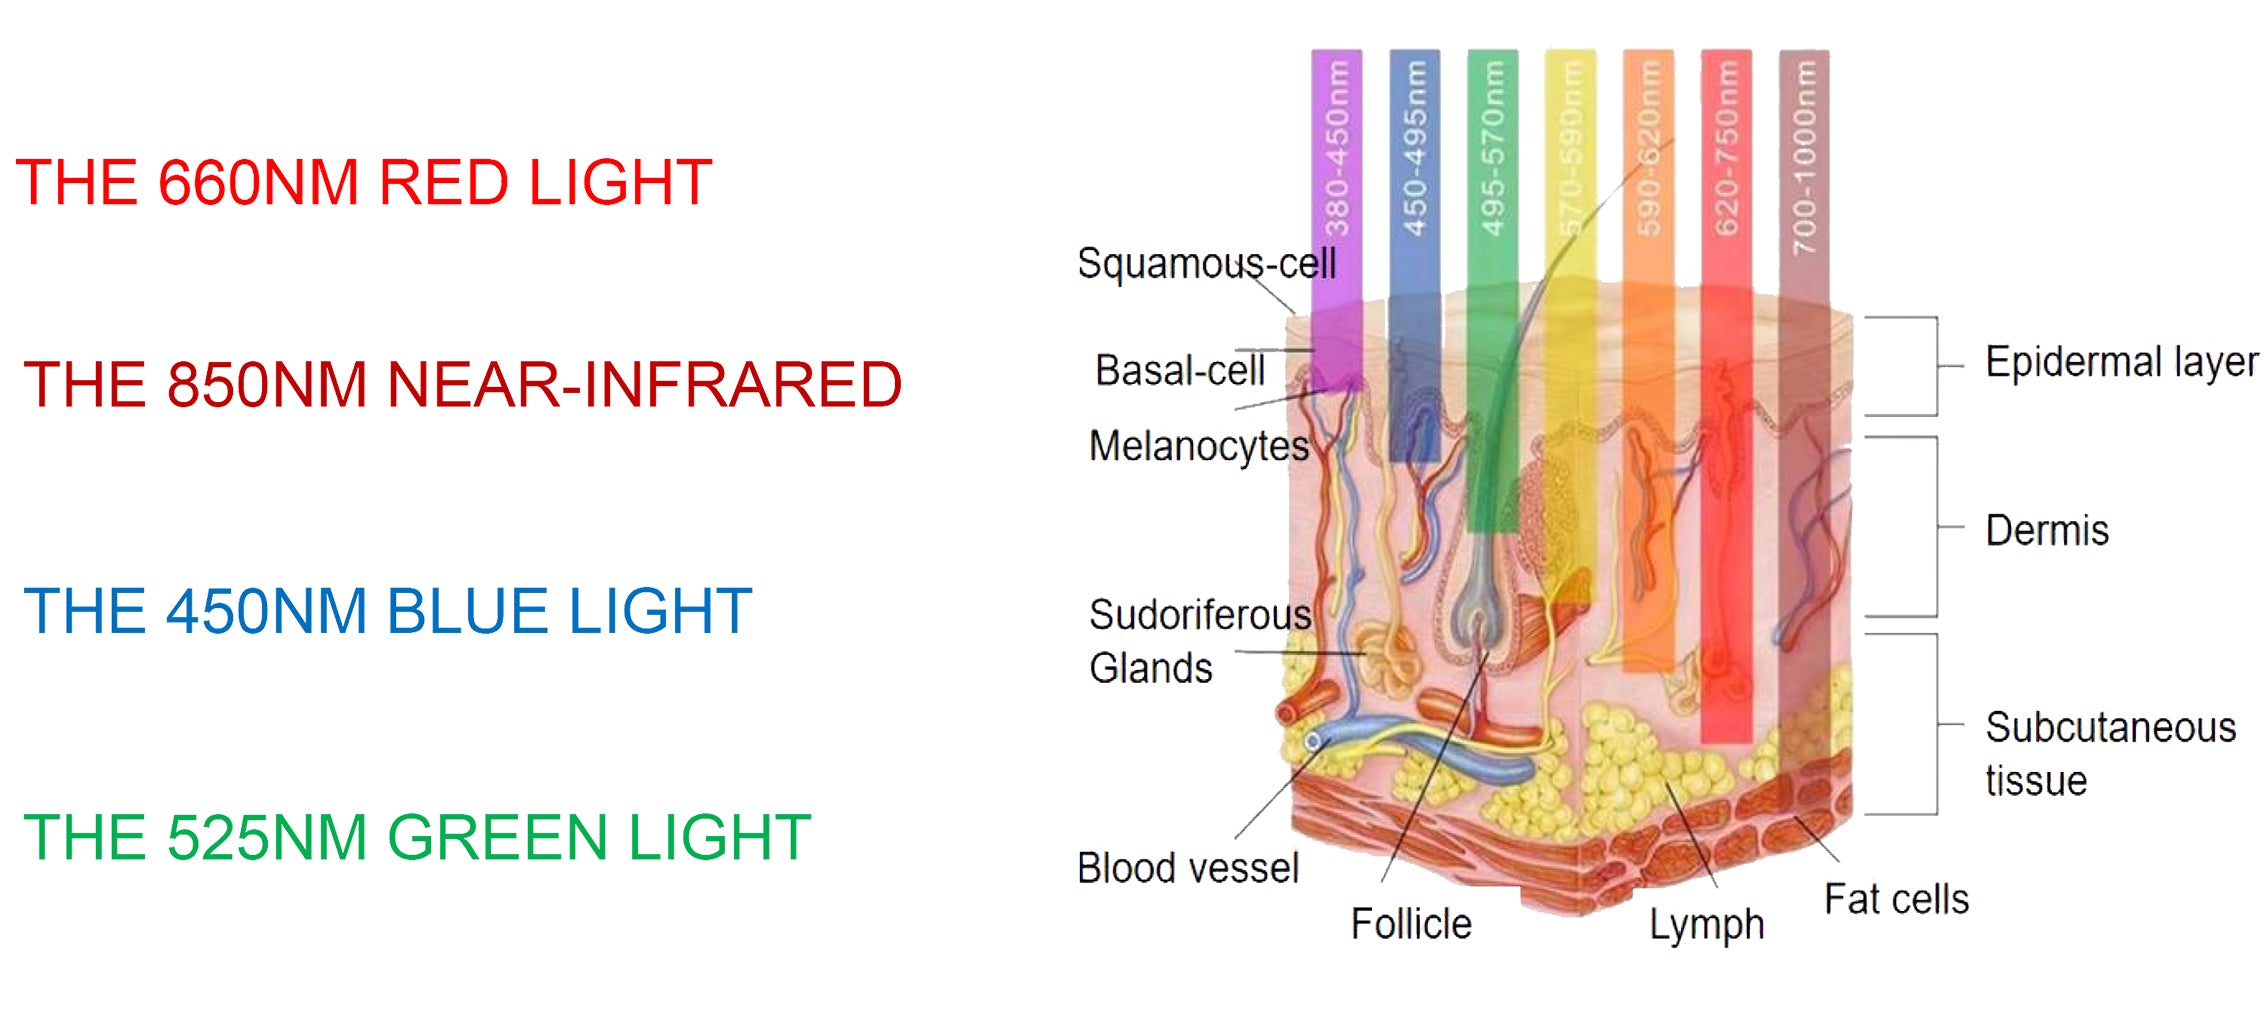 A Depiction of the different lights wavelengths and the layers of skin